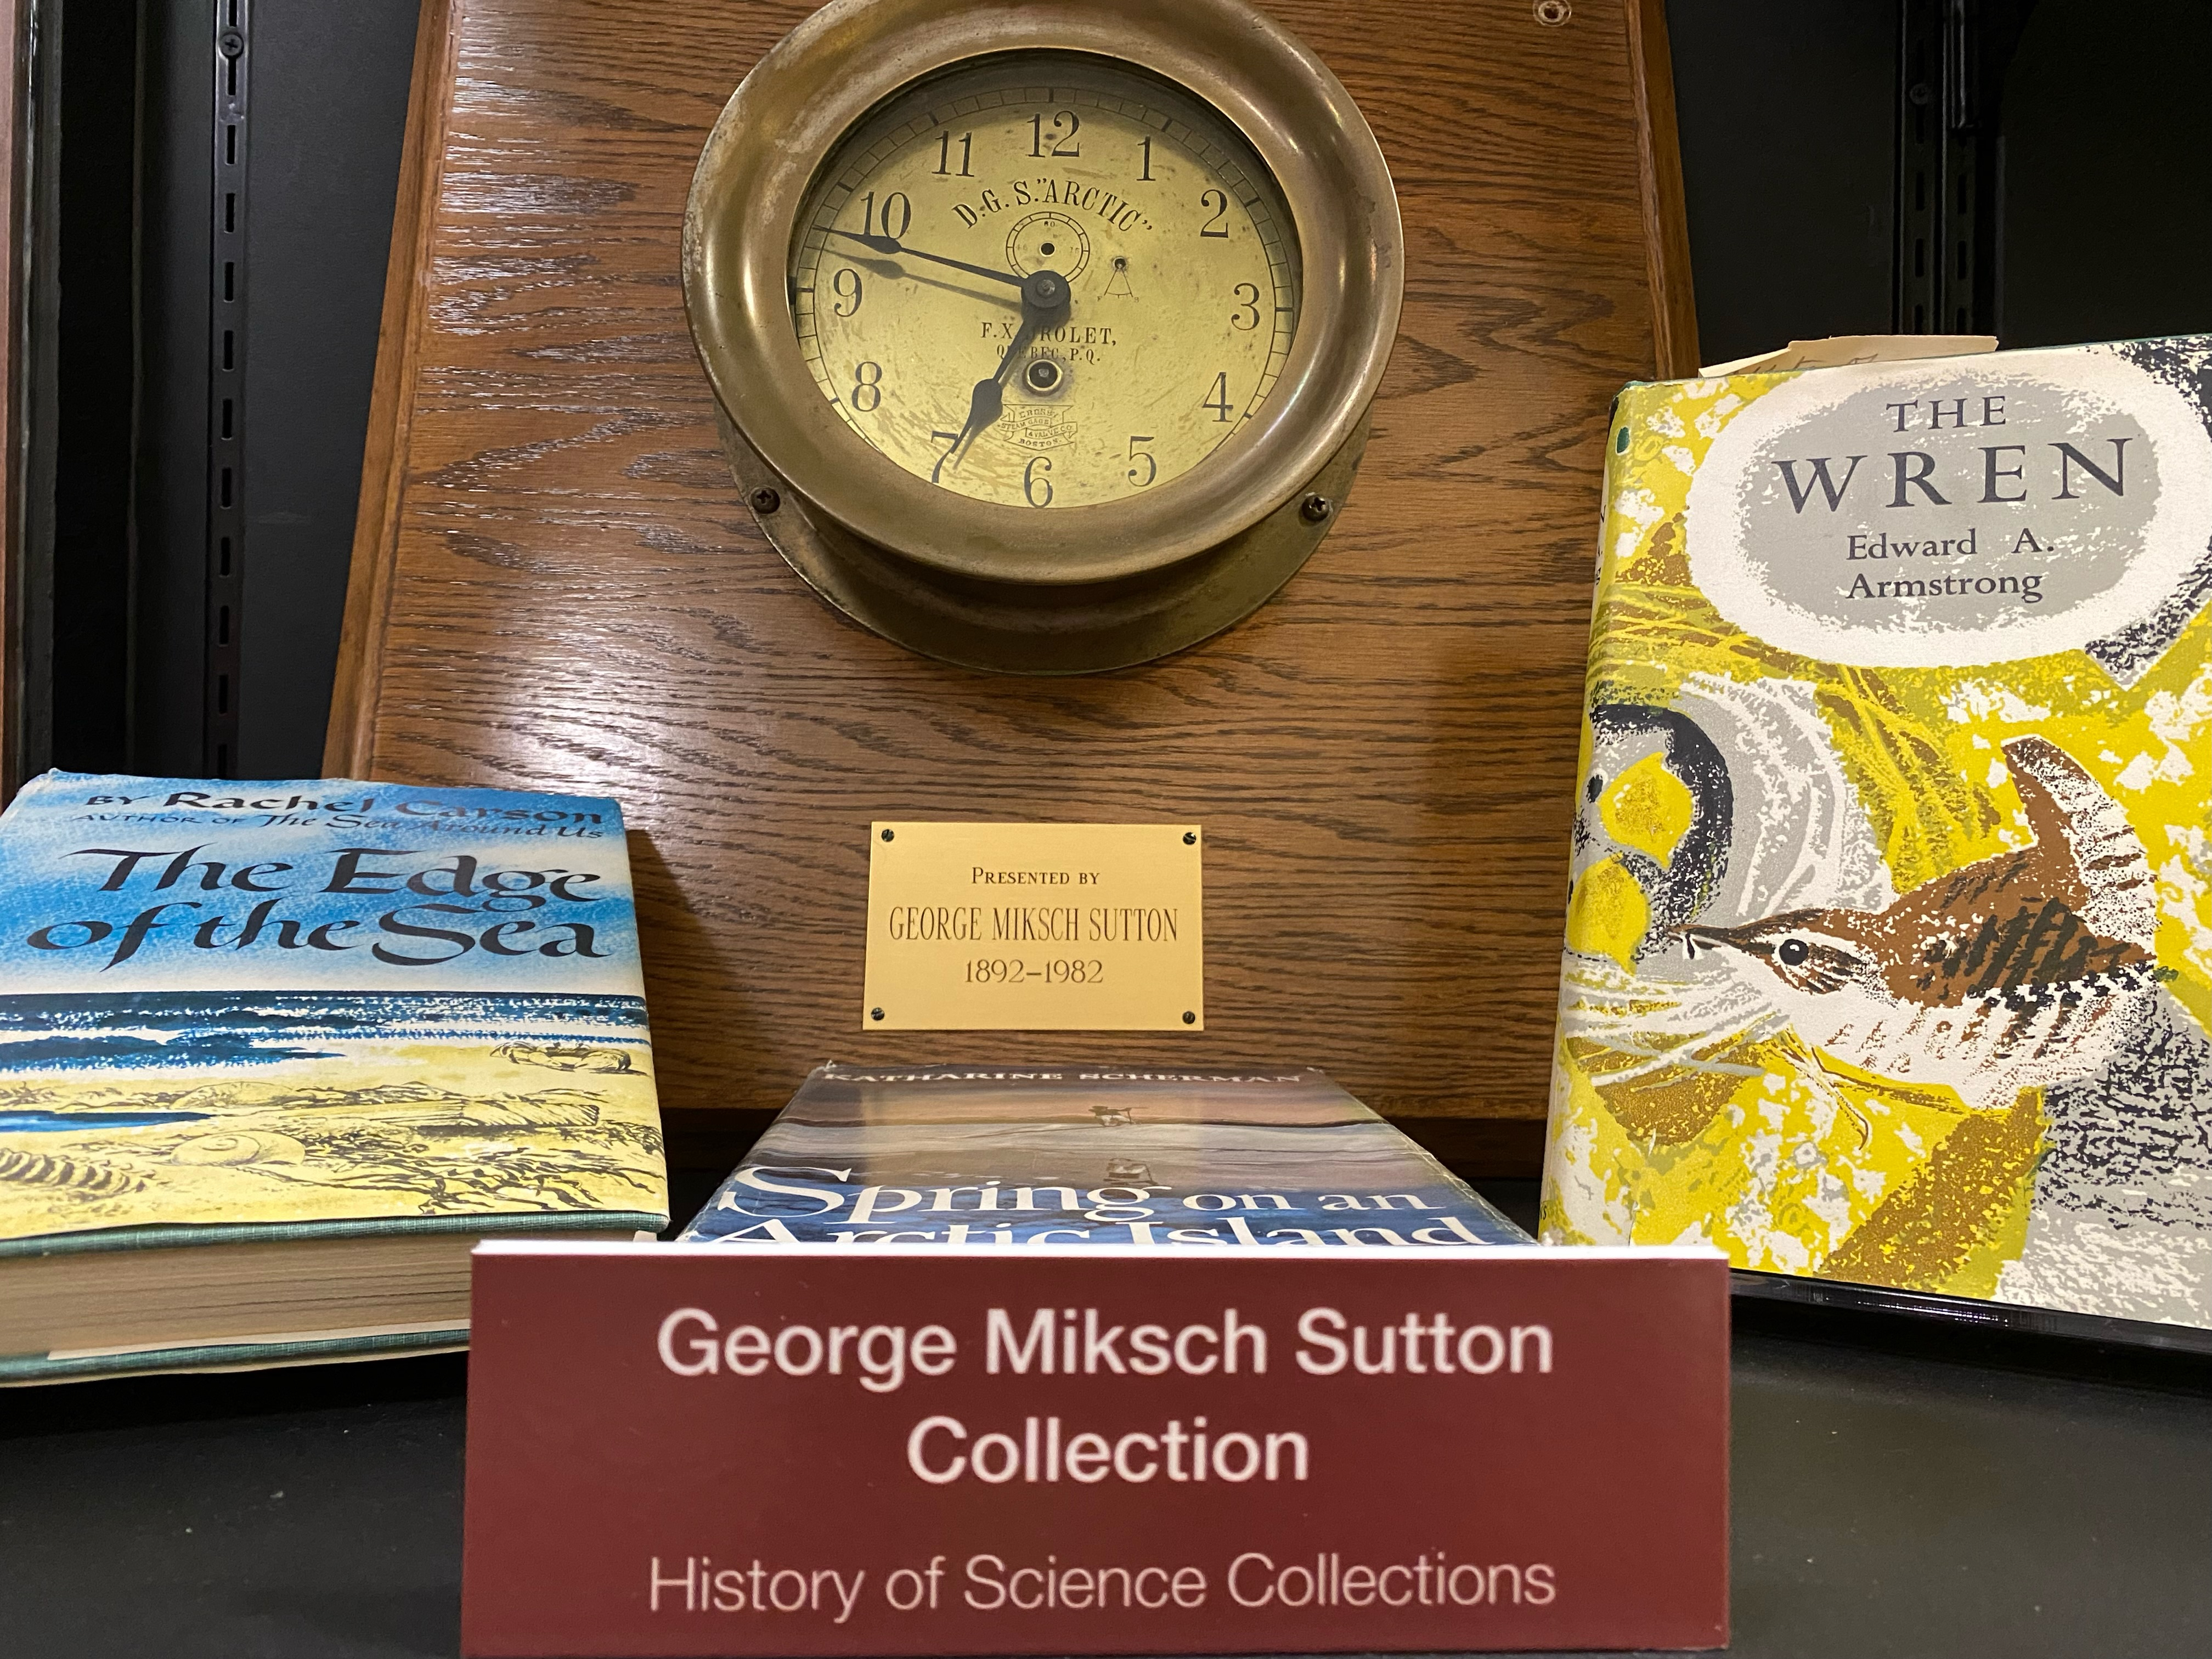 Photo of shelf with materials from the "George Miksch Sutton Collection." Includes two 3 books and clock on plaque